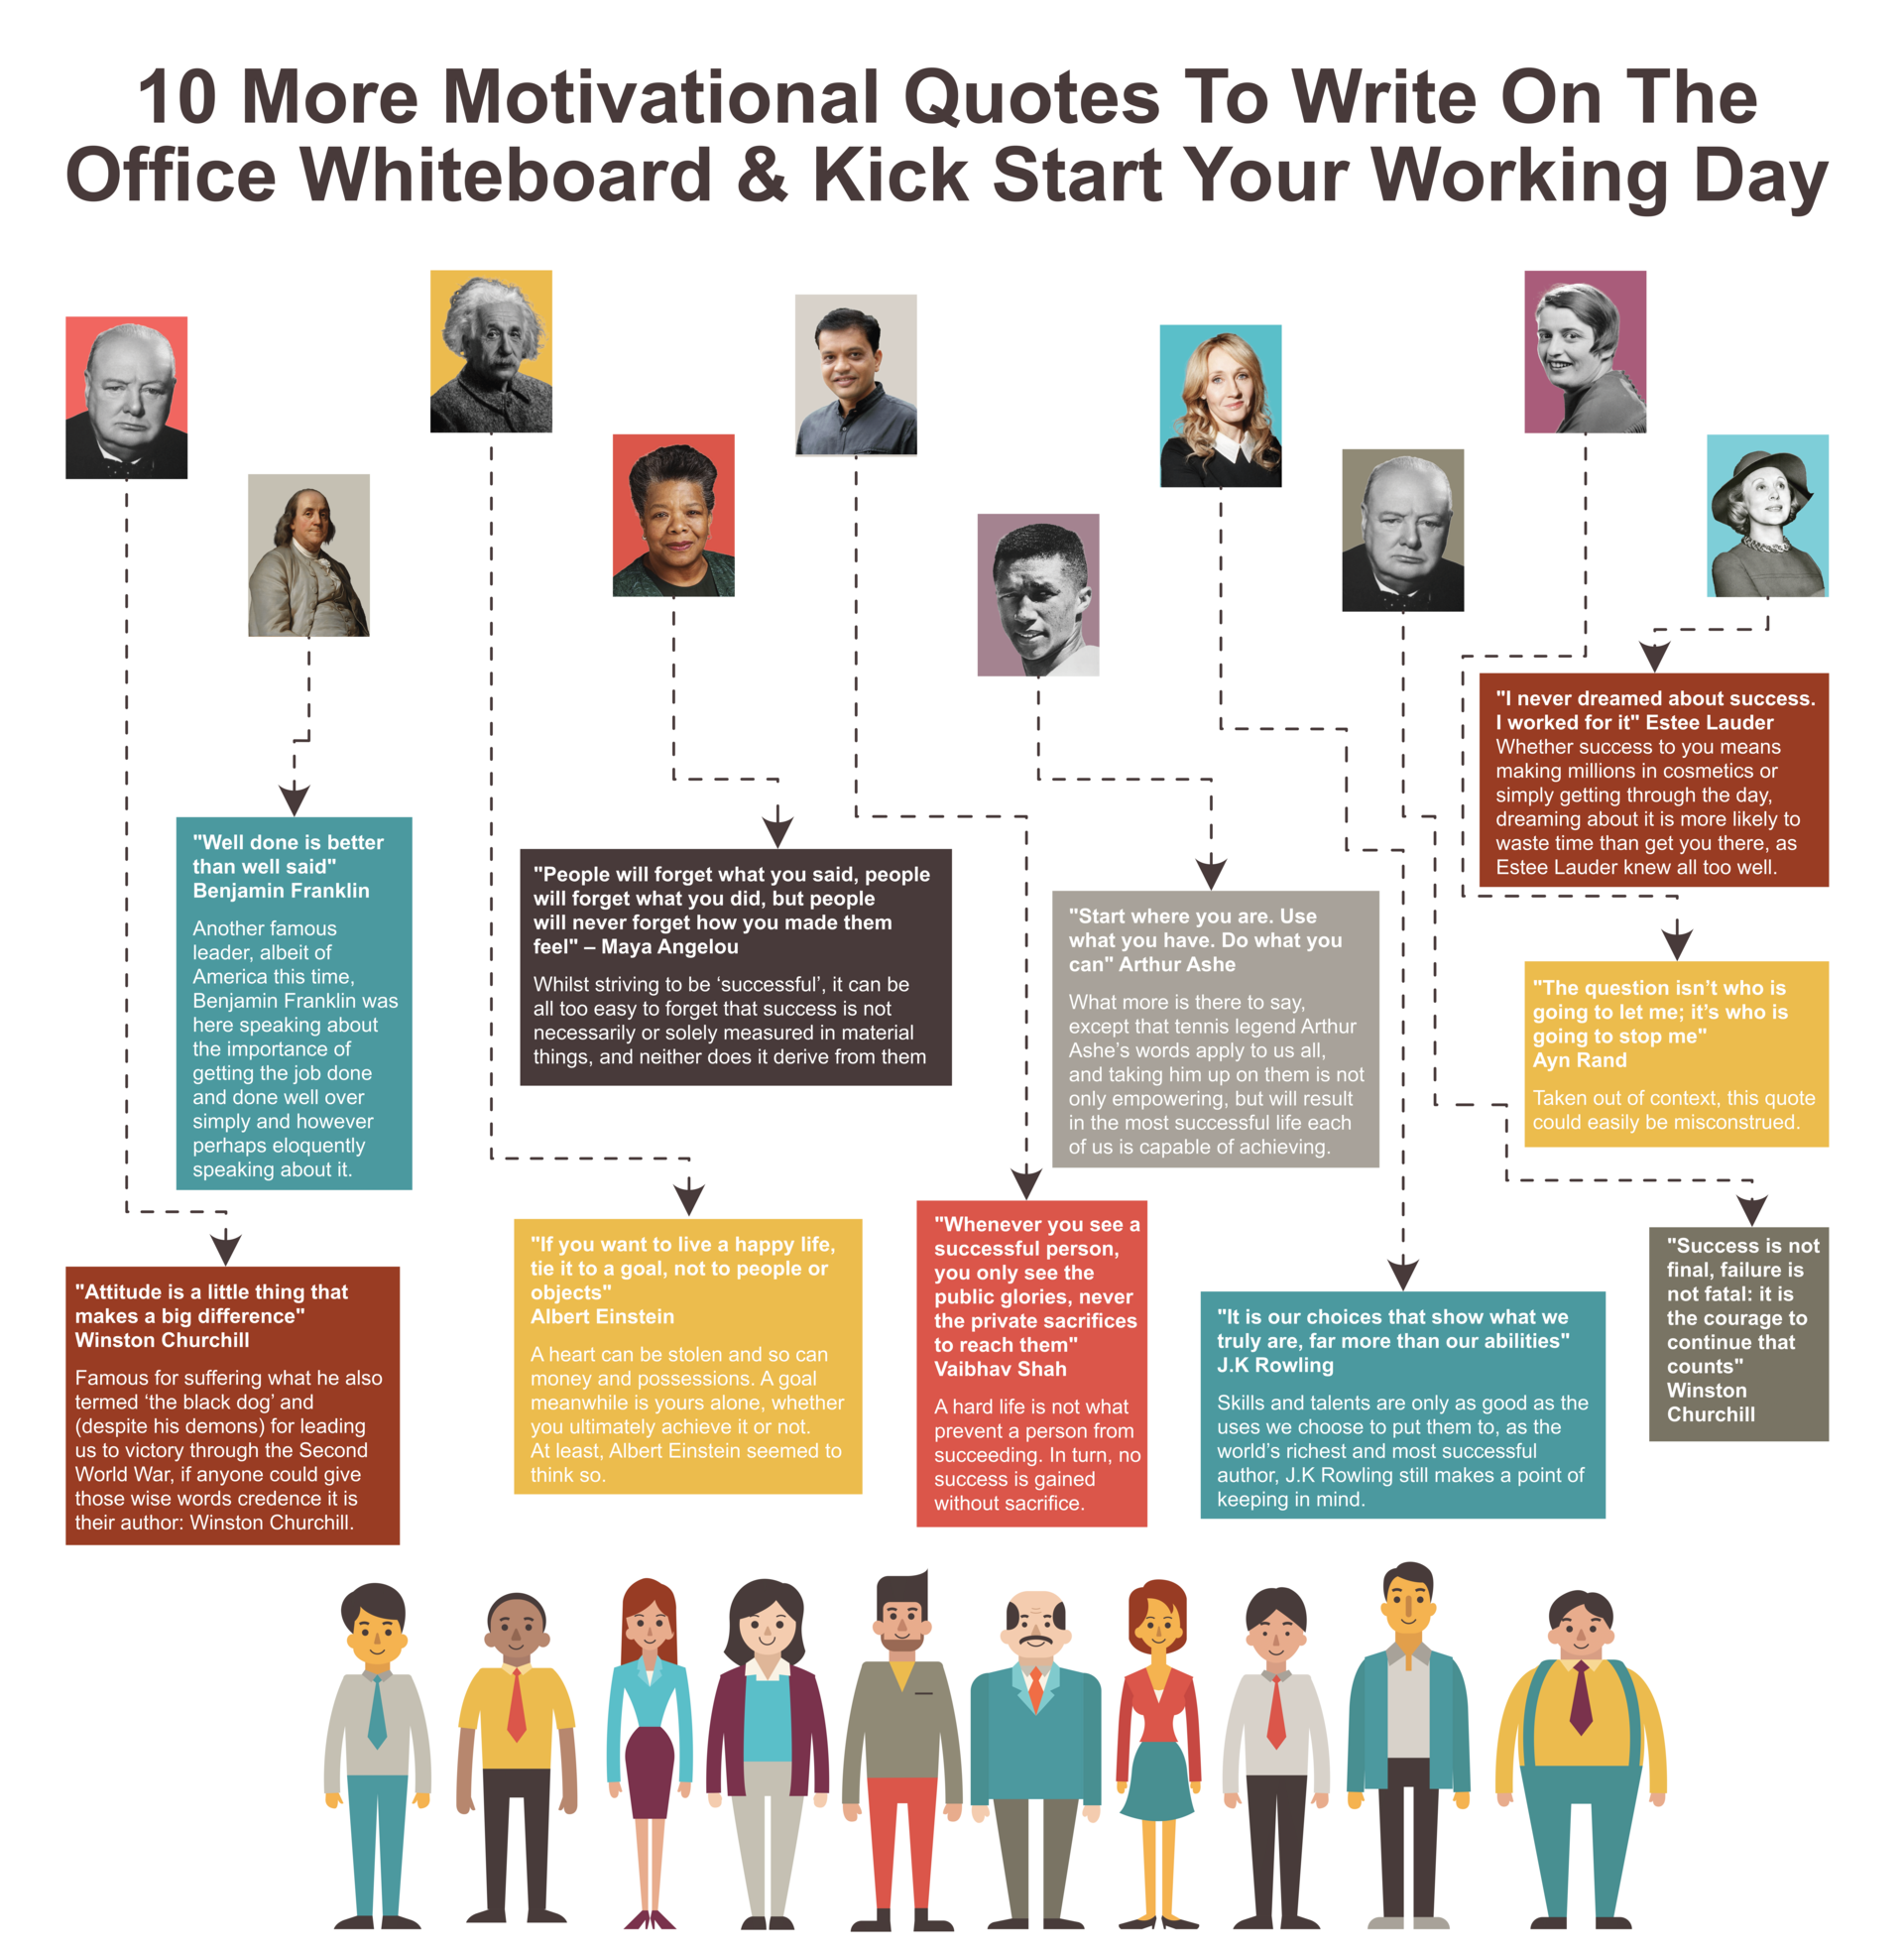 Motivational Quotes To Write On The Office Whiteboard - Infographic